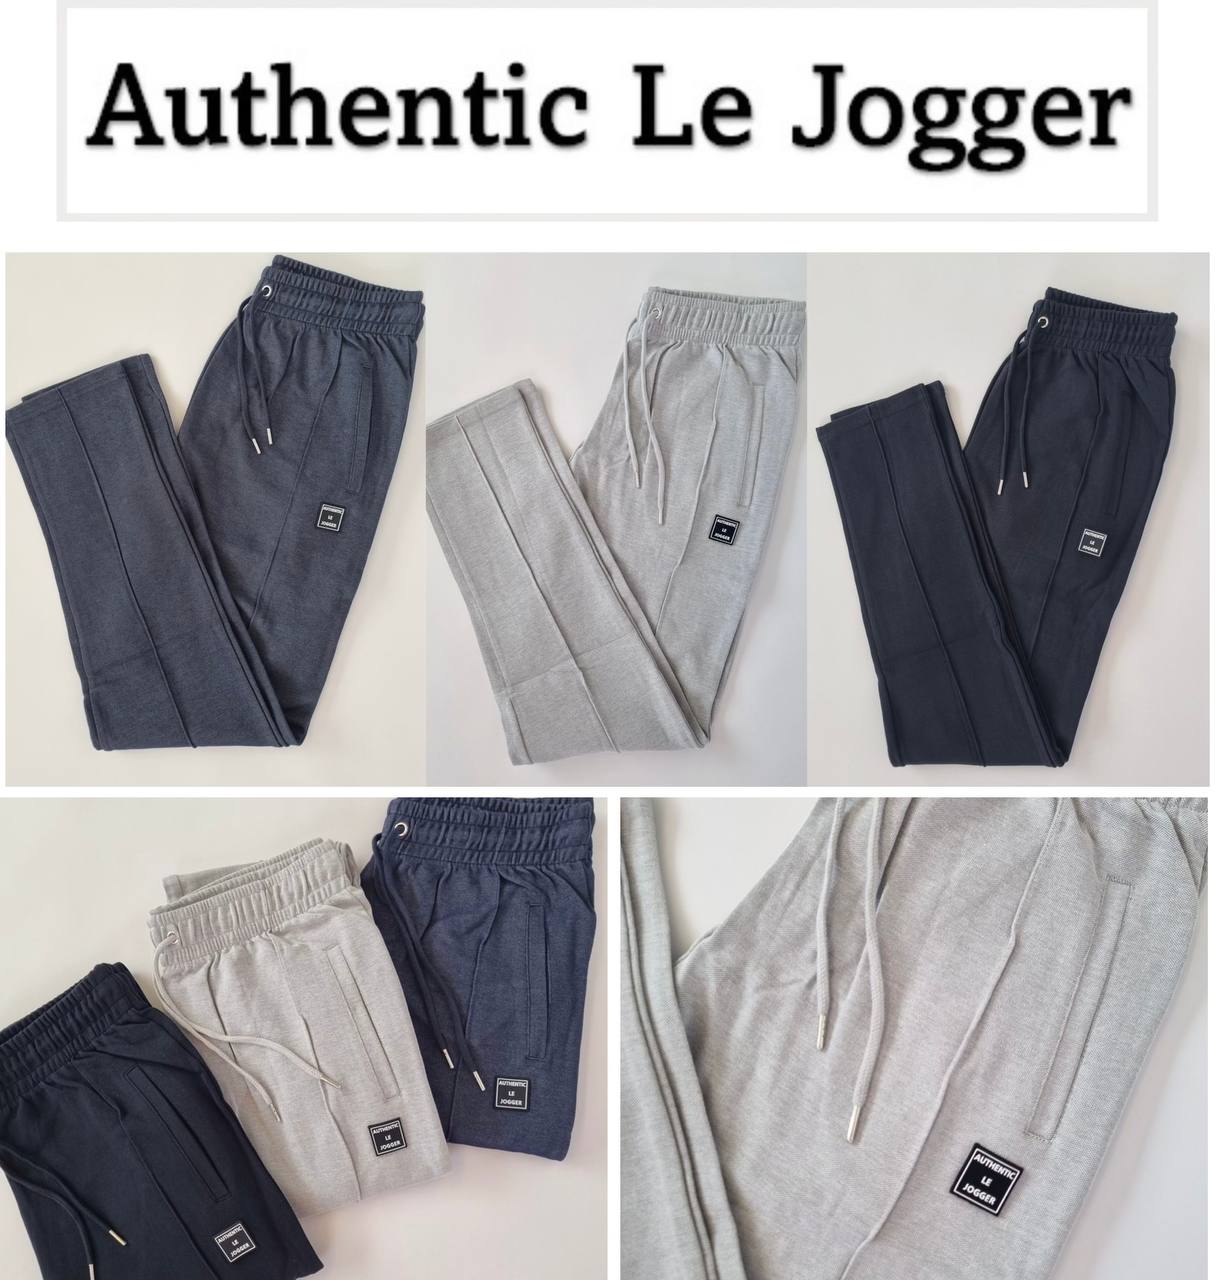 010035 Men's sports trousers from Authentic Le Jogger